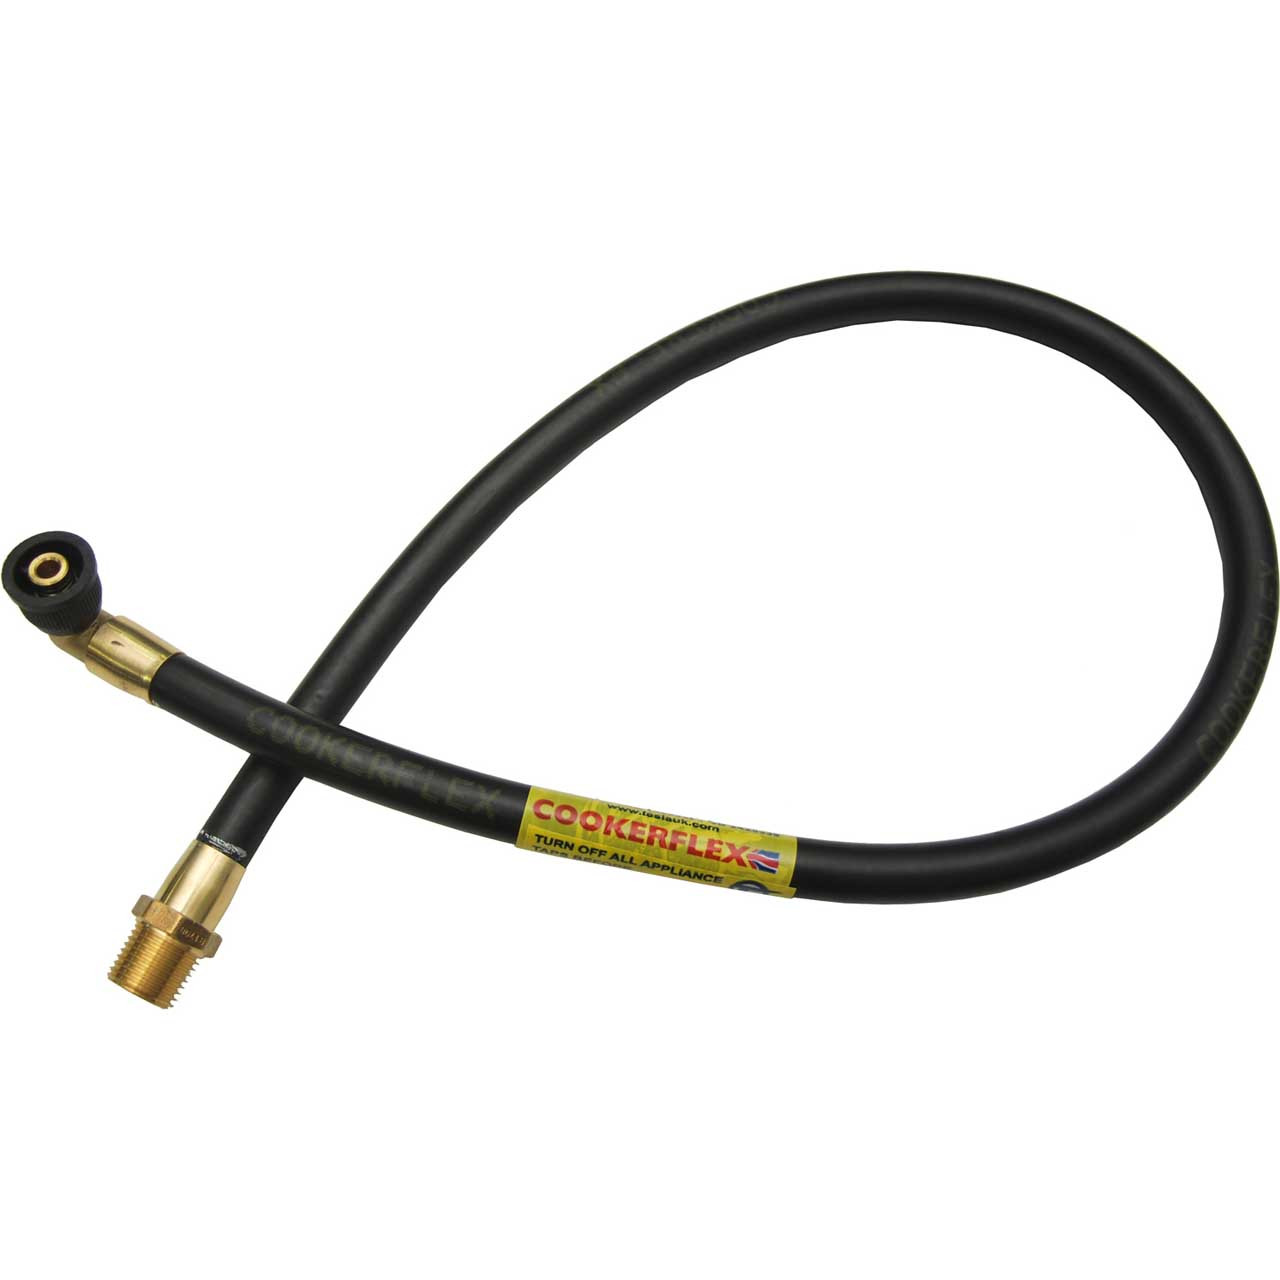 Photograph of Embrass 3'6 Micro Angled Cooker Flex Hose